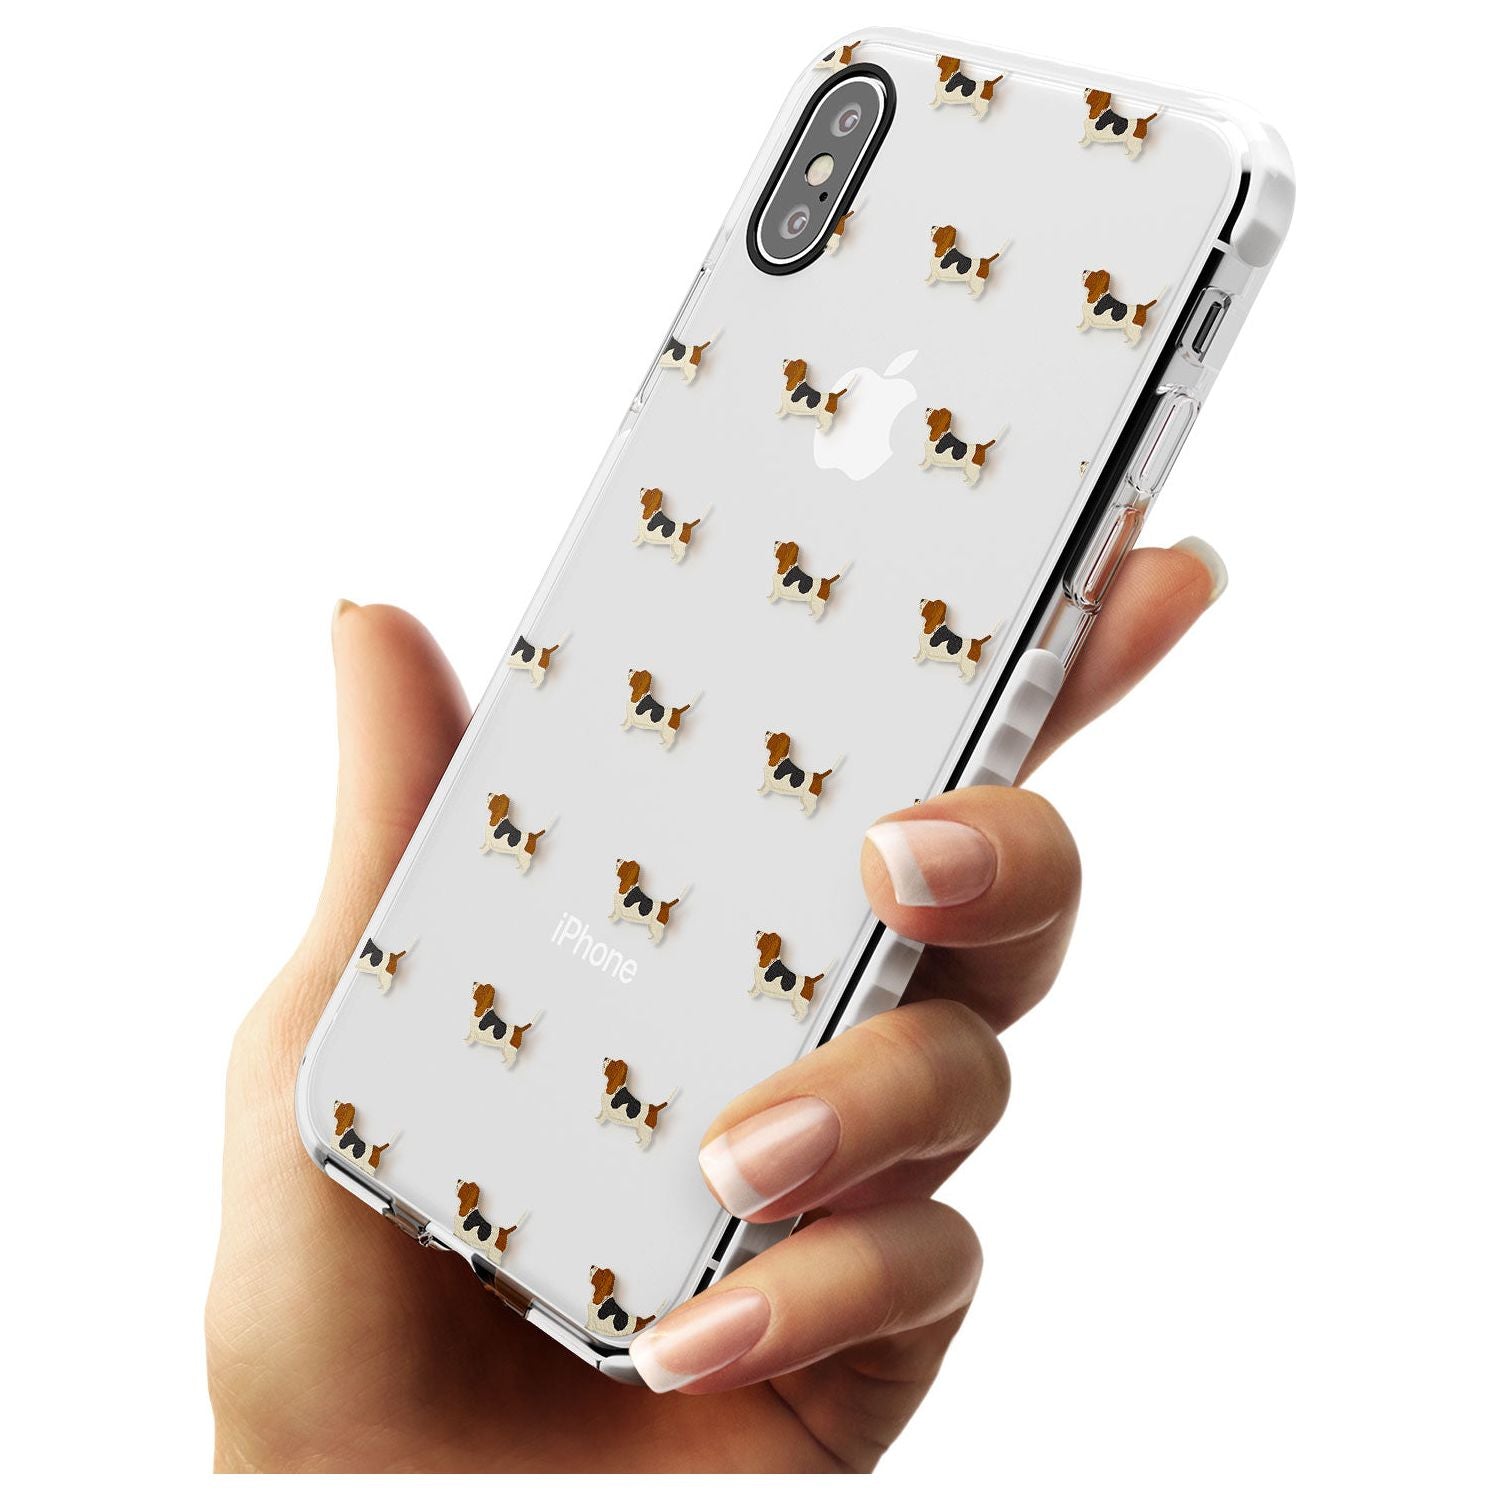 . Basset Hound Dog Pattern Clear Impact Phone Case for iPhone X XS Max XR